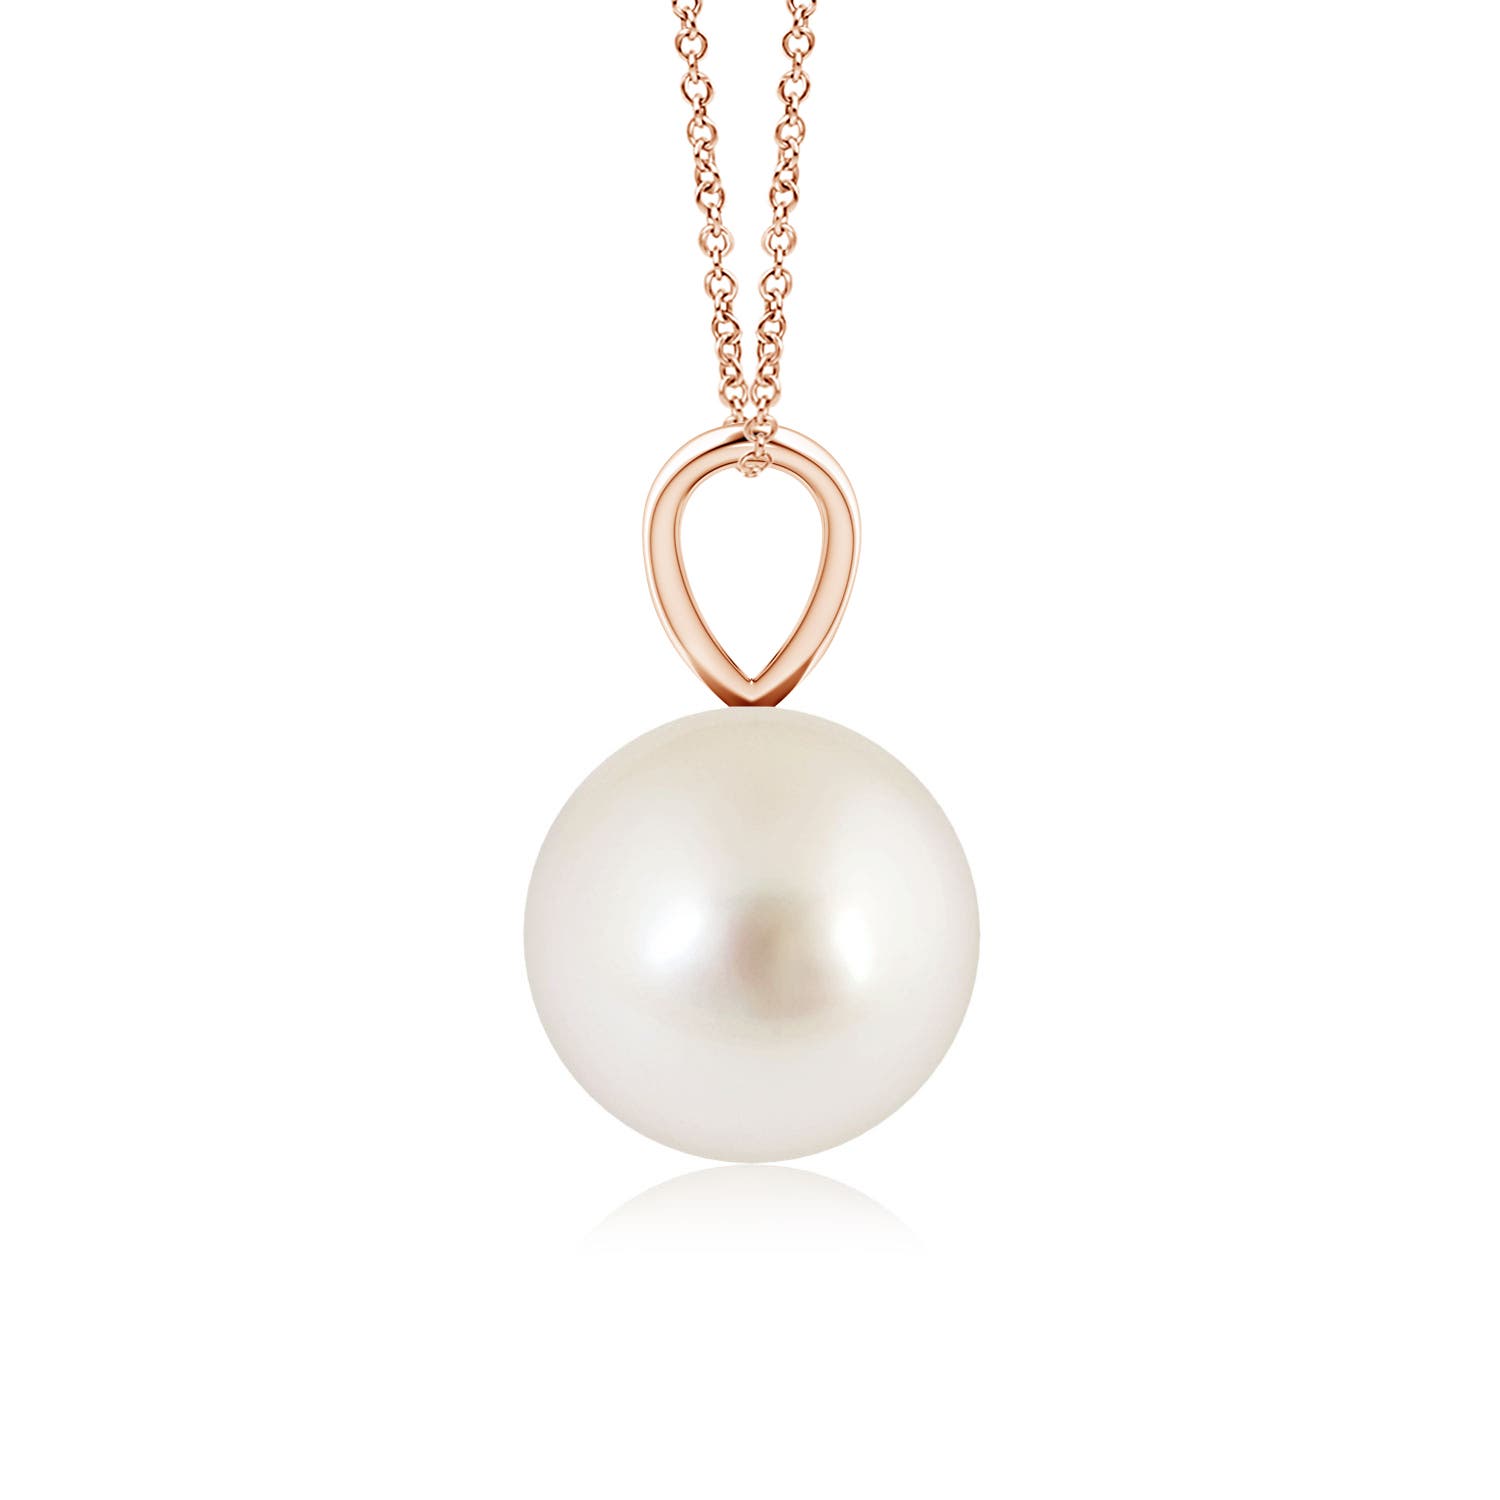 AAAA - South Sea Cultured Pearl / 3.7 CT / 14 KT Rose Gold